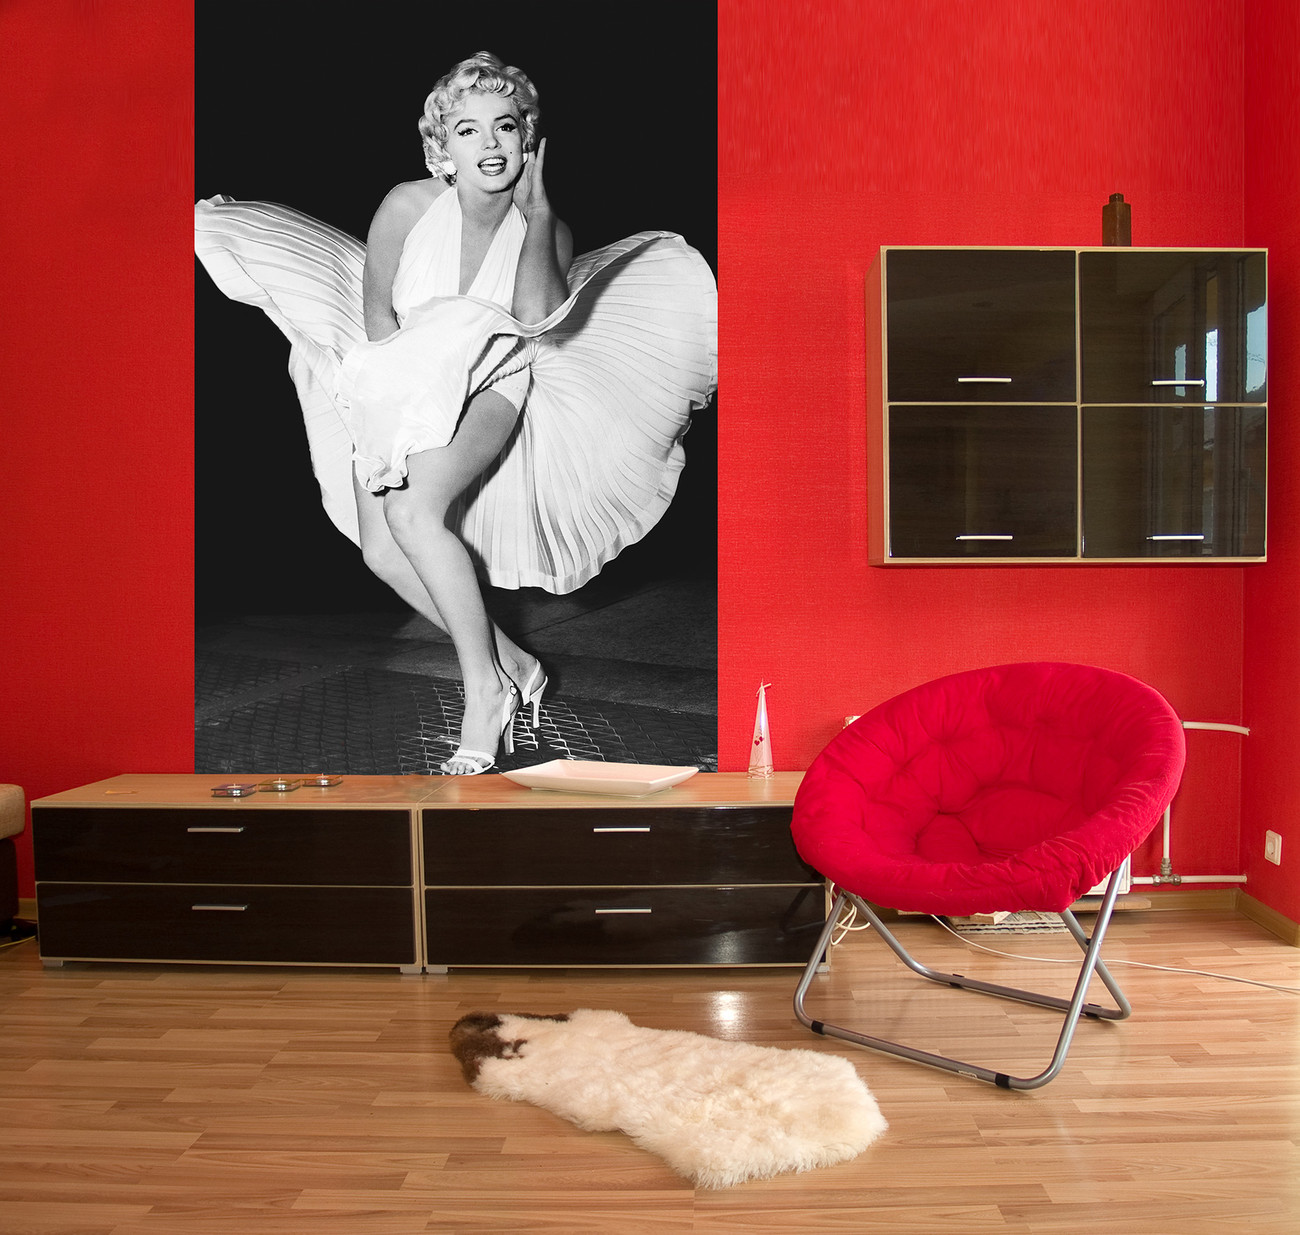 legend Buy online MONROE | Mural the MARILYN at Wall Europosters –